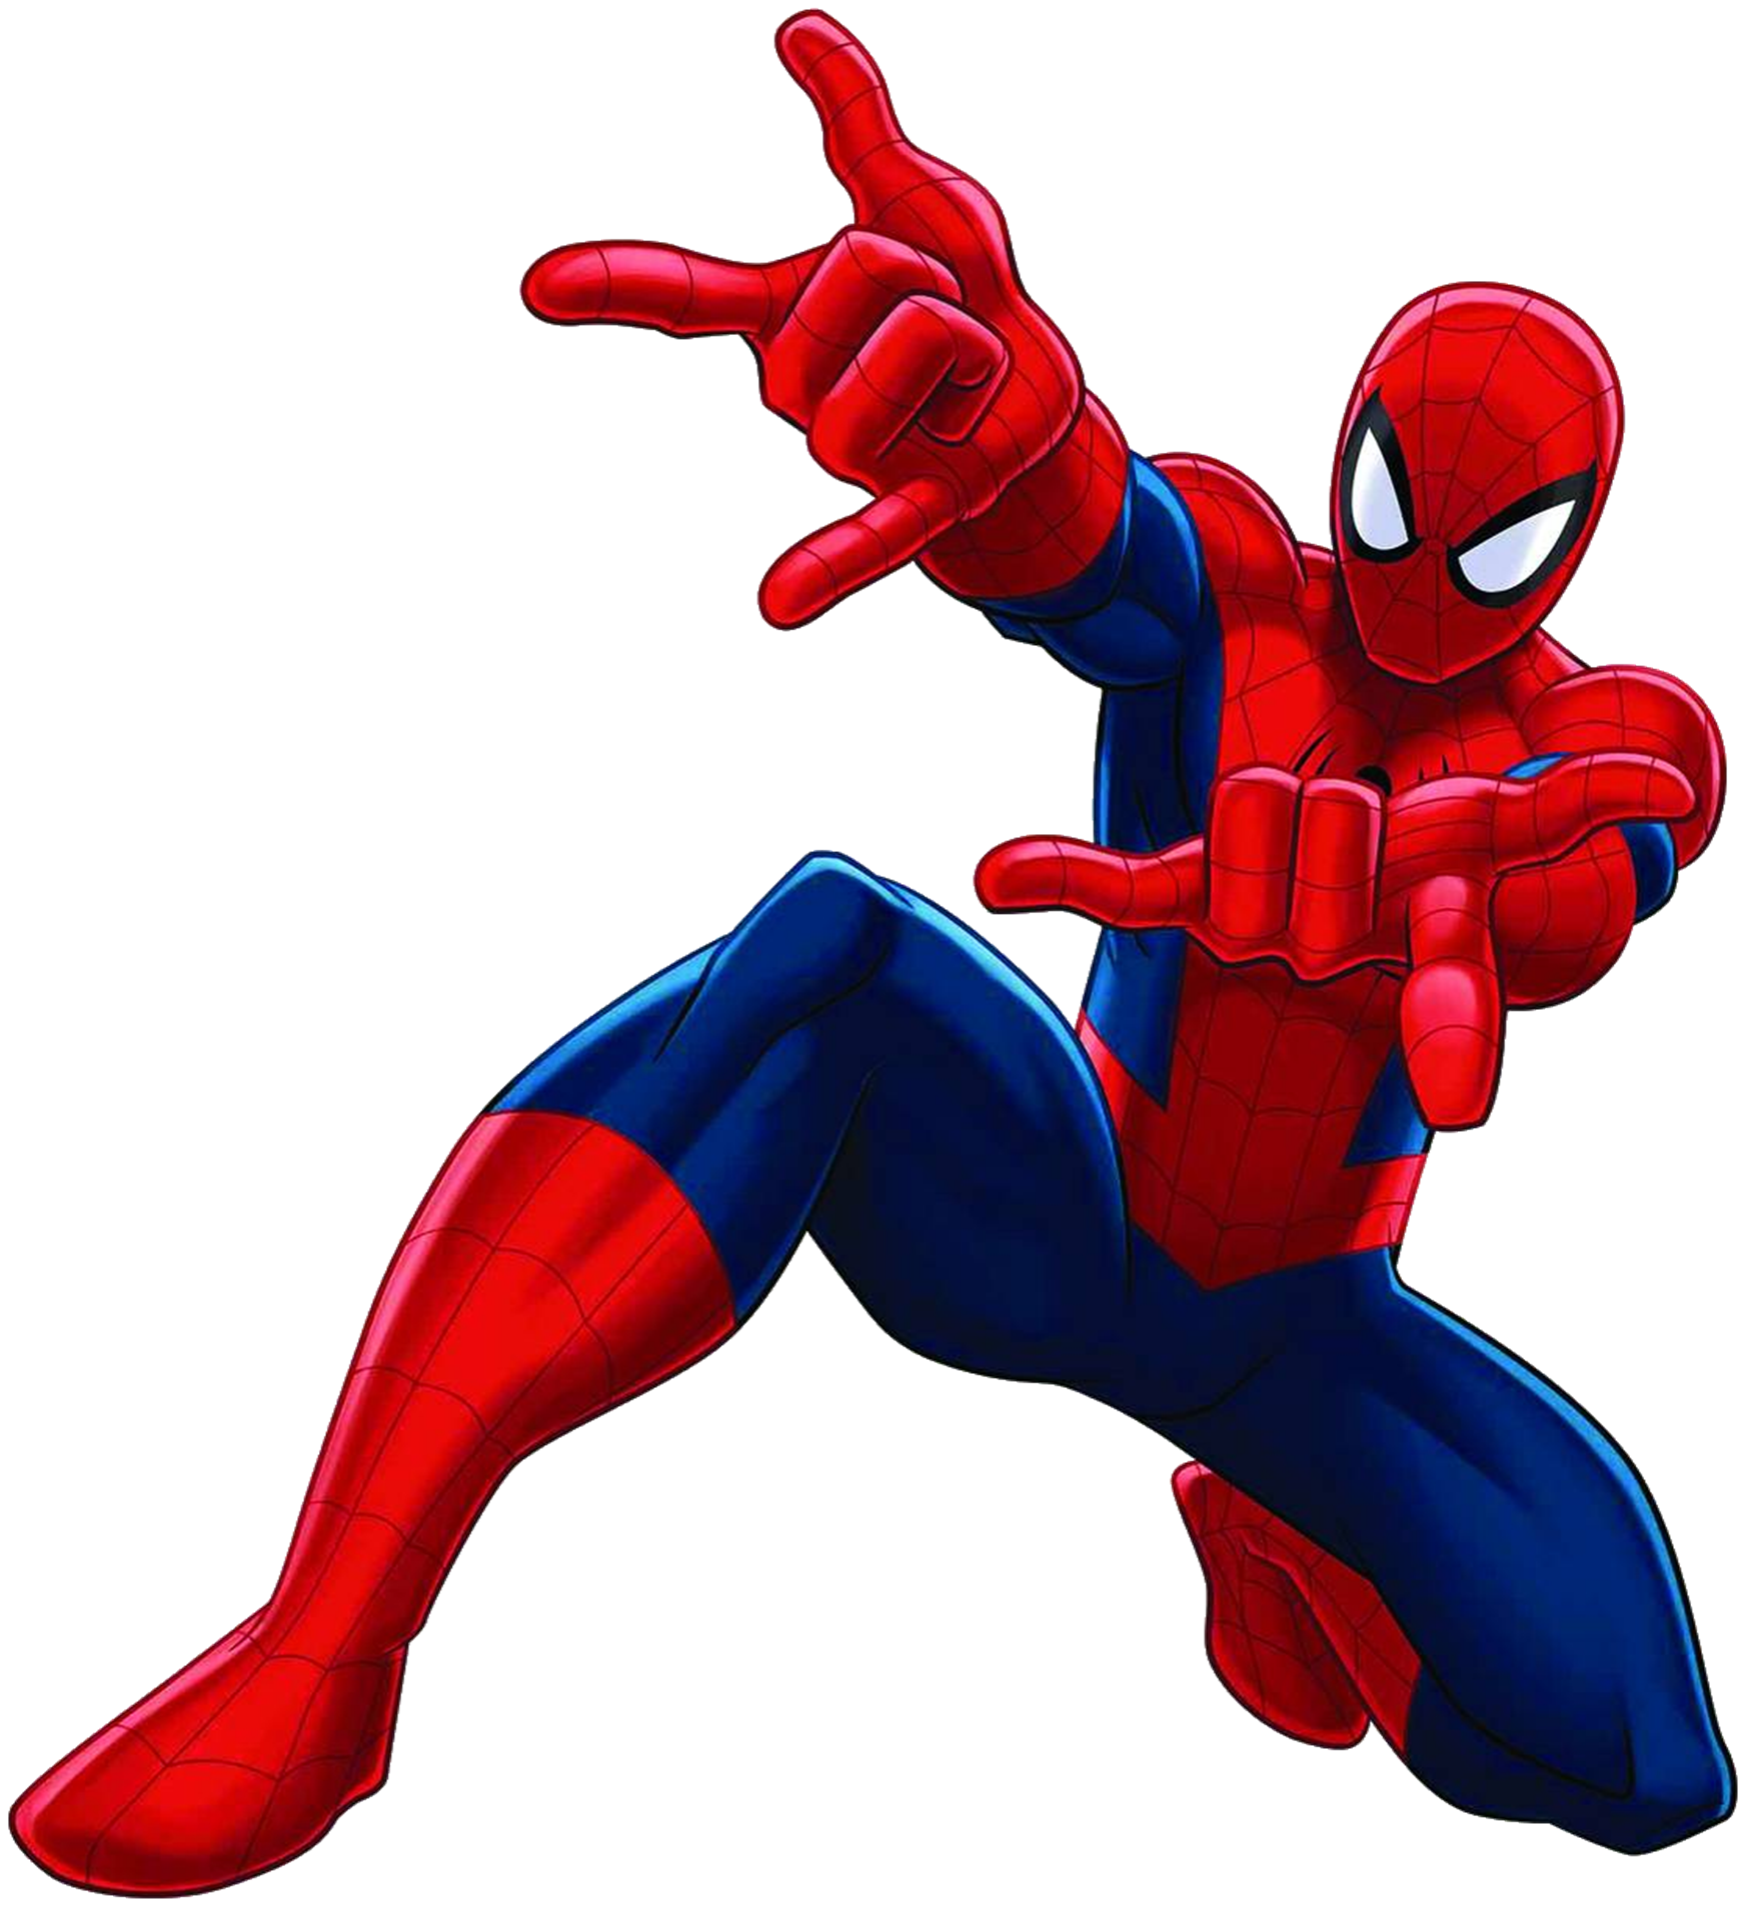 Images of spider man. Hand clipart spiderman